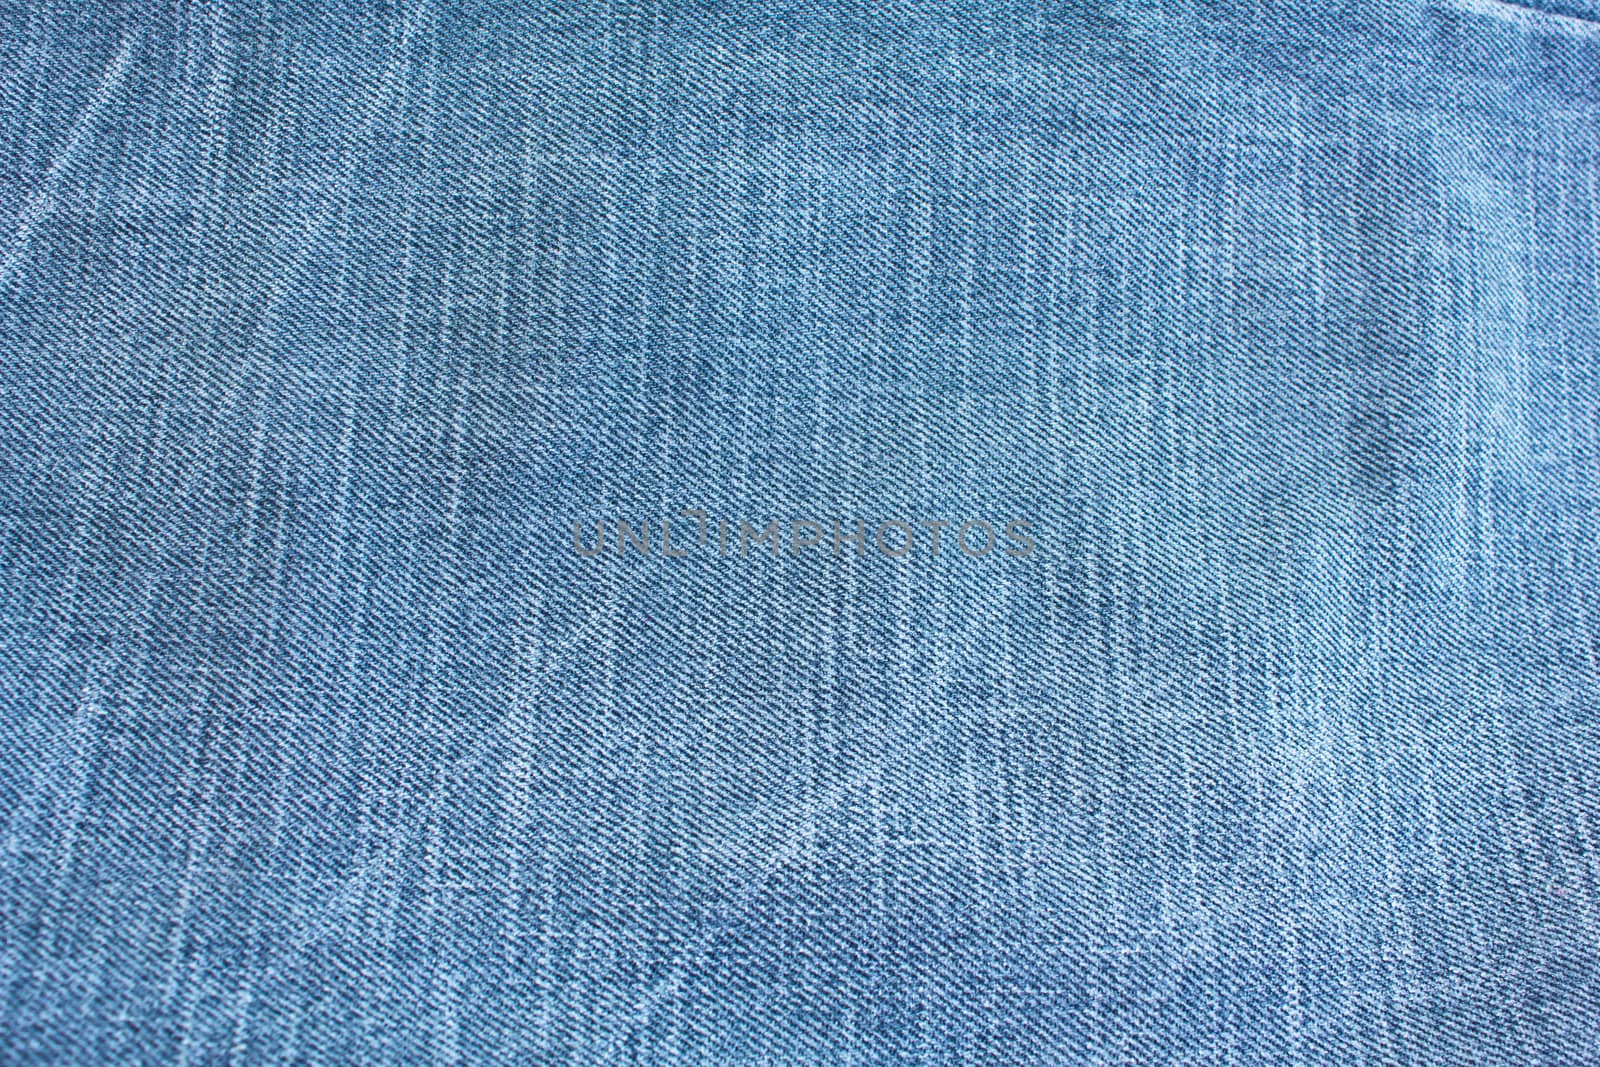 blue jean cloth texture background by singkamc